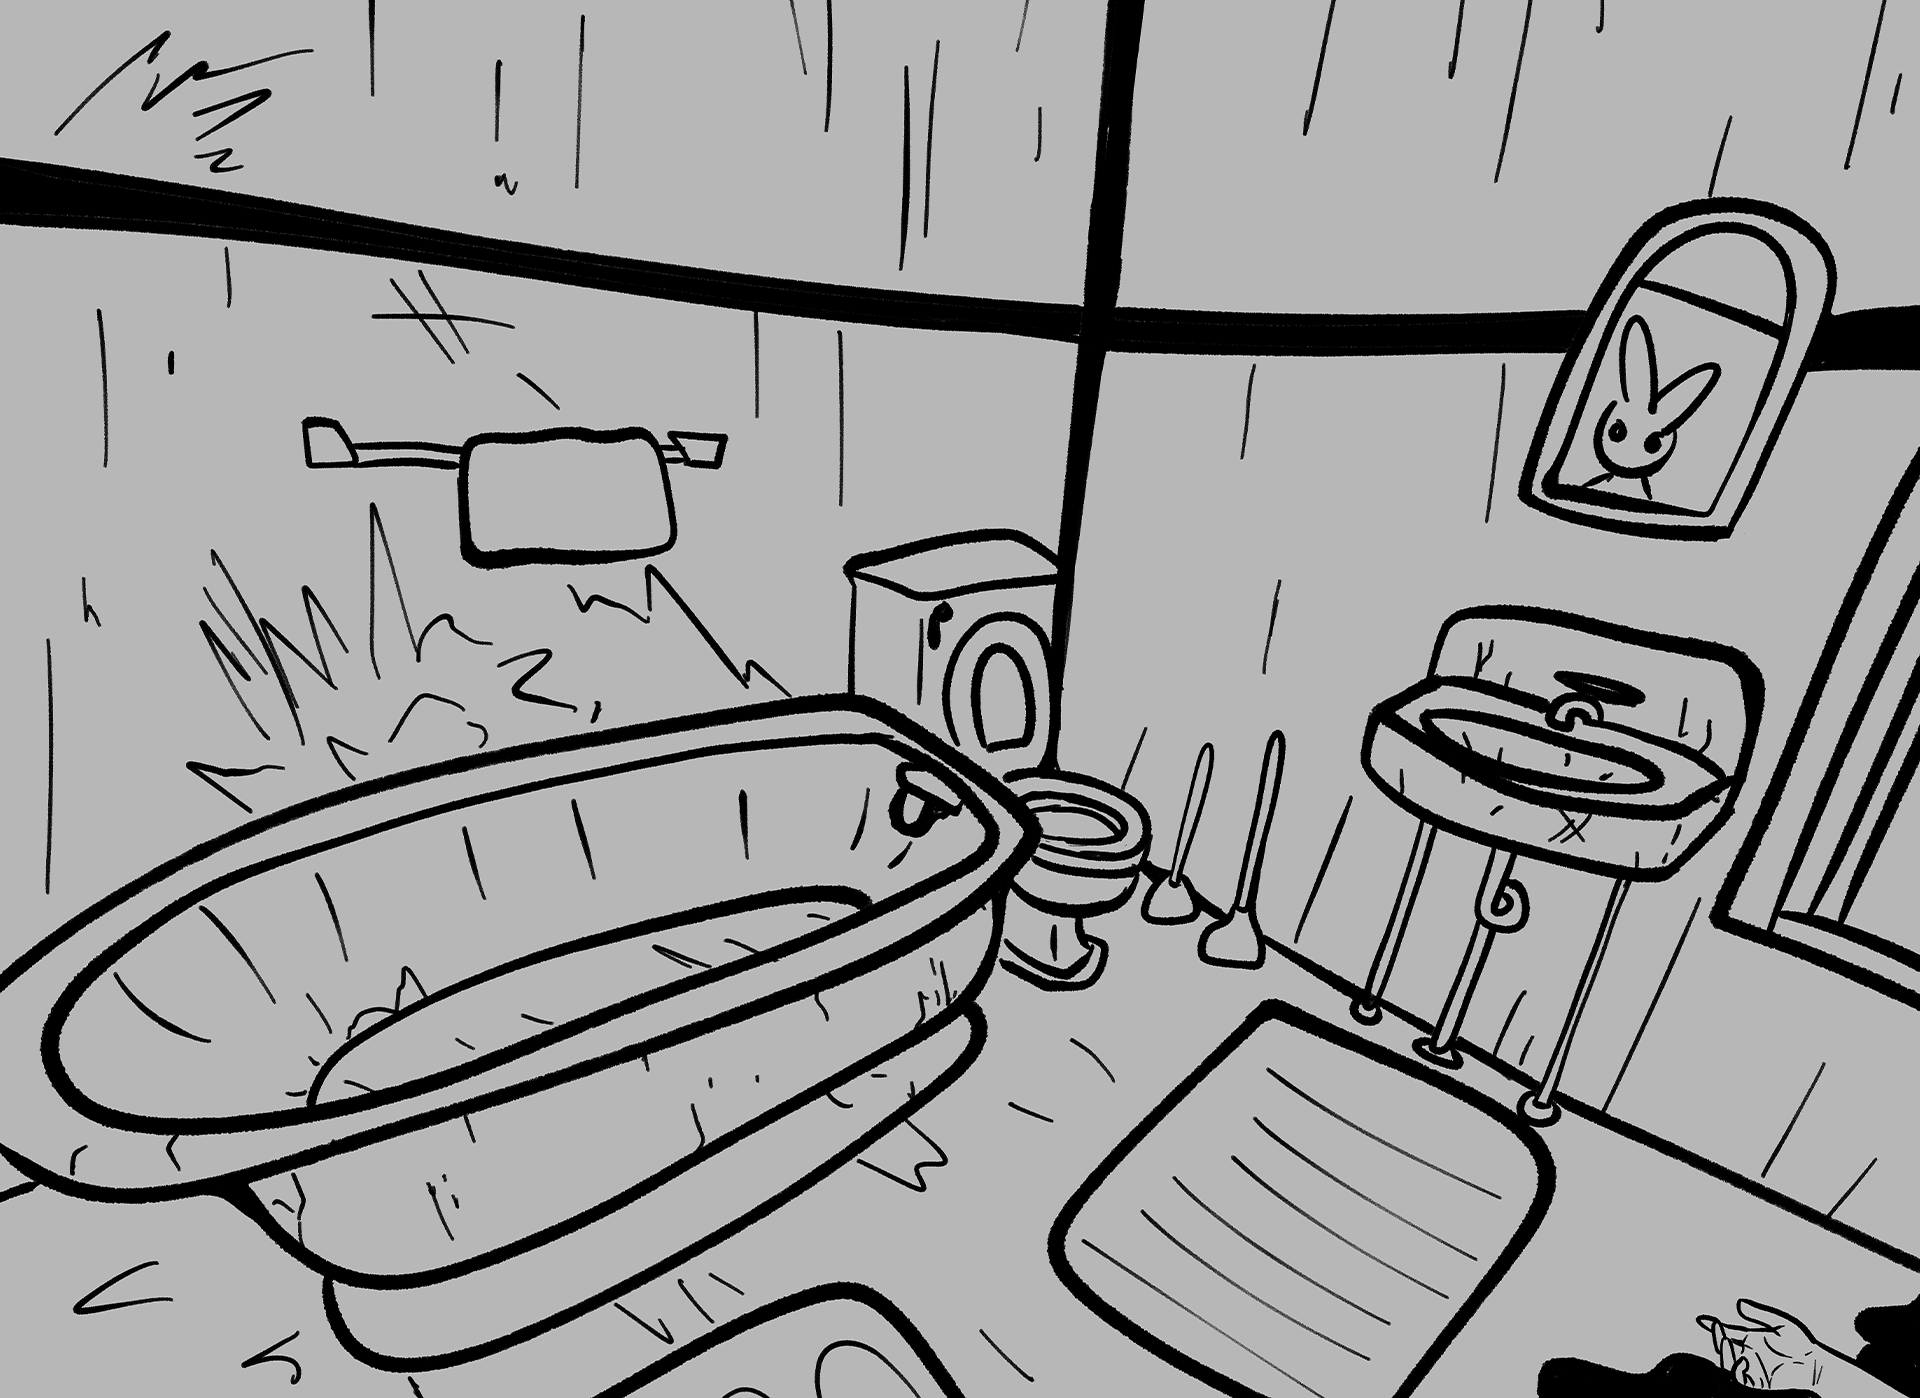 The black and white concept art provided by my assigned artist. It shows a decrepit bathroom with an ominous figure of a rabbit in the mirror, hidden in the bottom right corner is a splatter, and a limp hand.